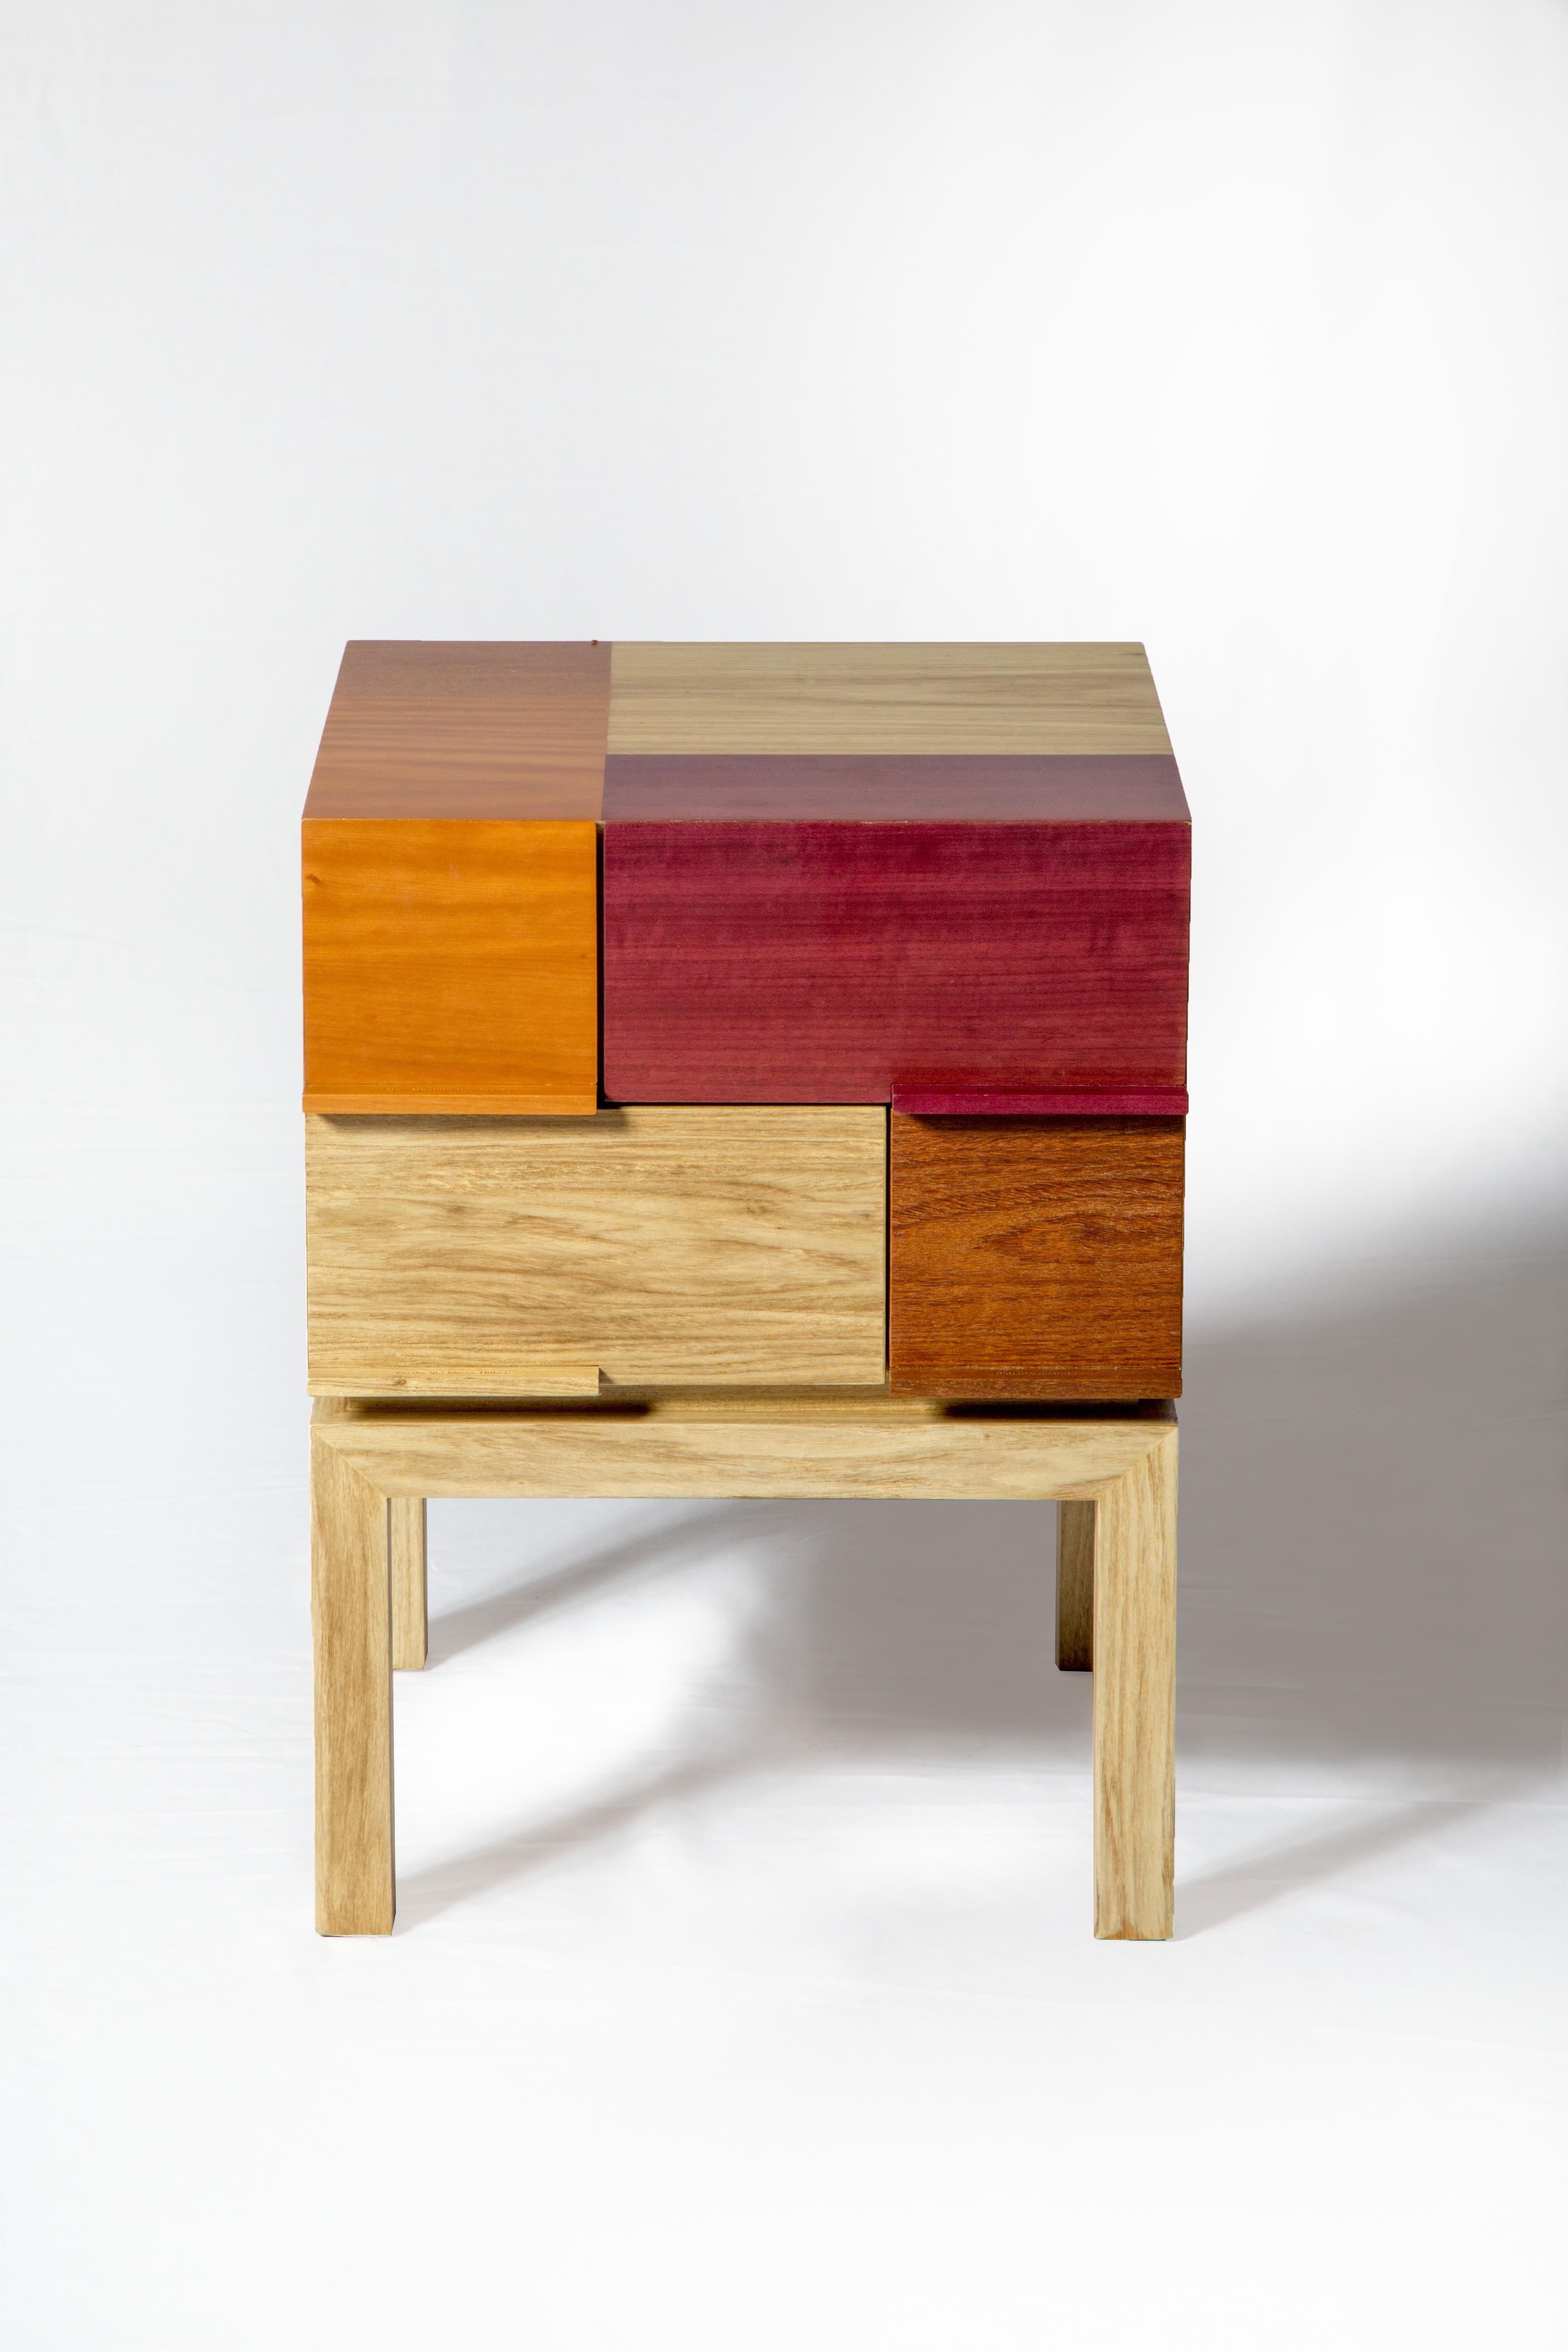 A magnificent  Side Table represents all beaty and diversity of woods found in Brazil; 
This elegant piece would be great as side or end tables in a living room, family room or office. 
Four types of Brazilian woods (Freijó, Rouxinho, Cumarú e